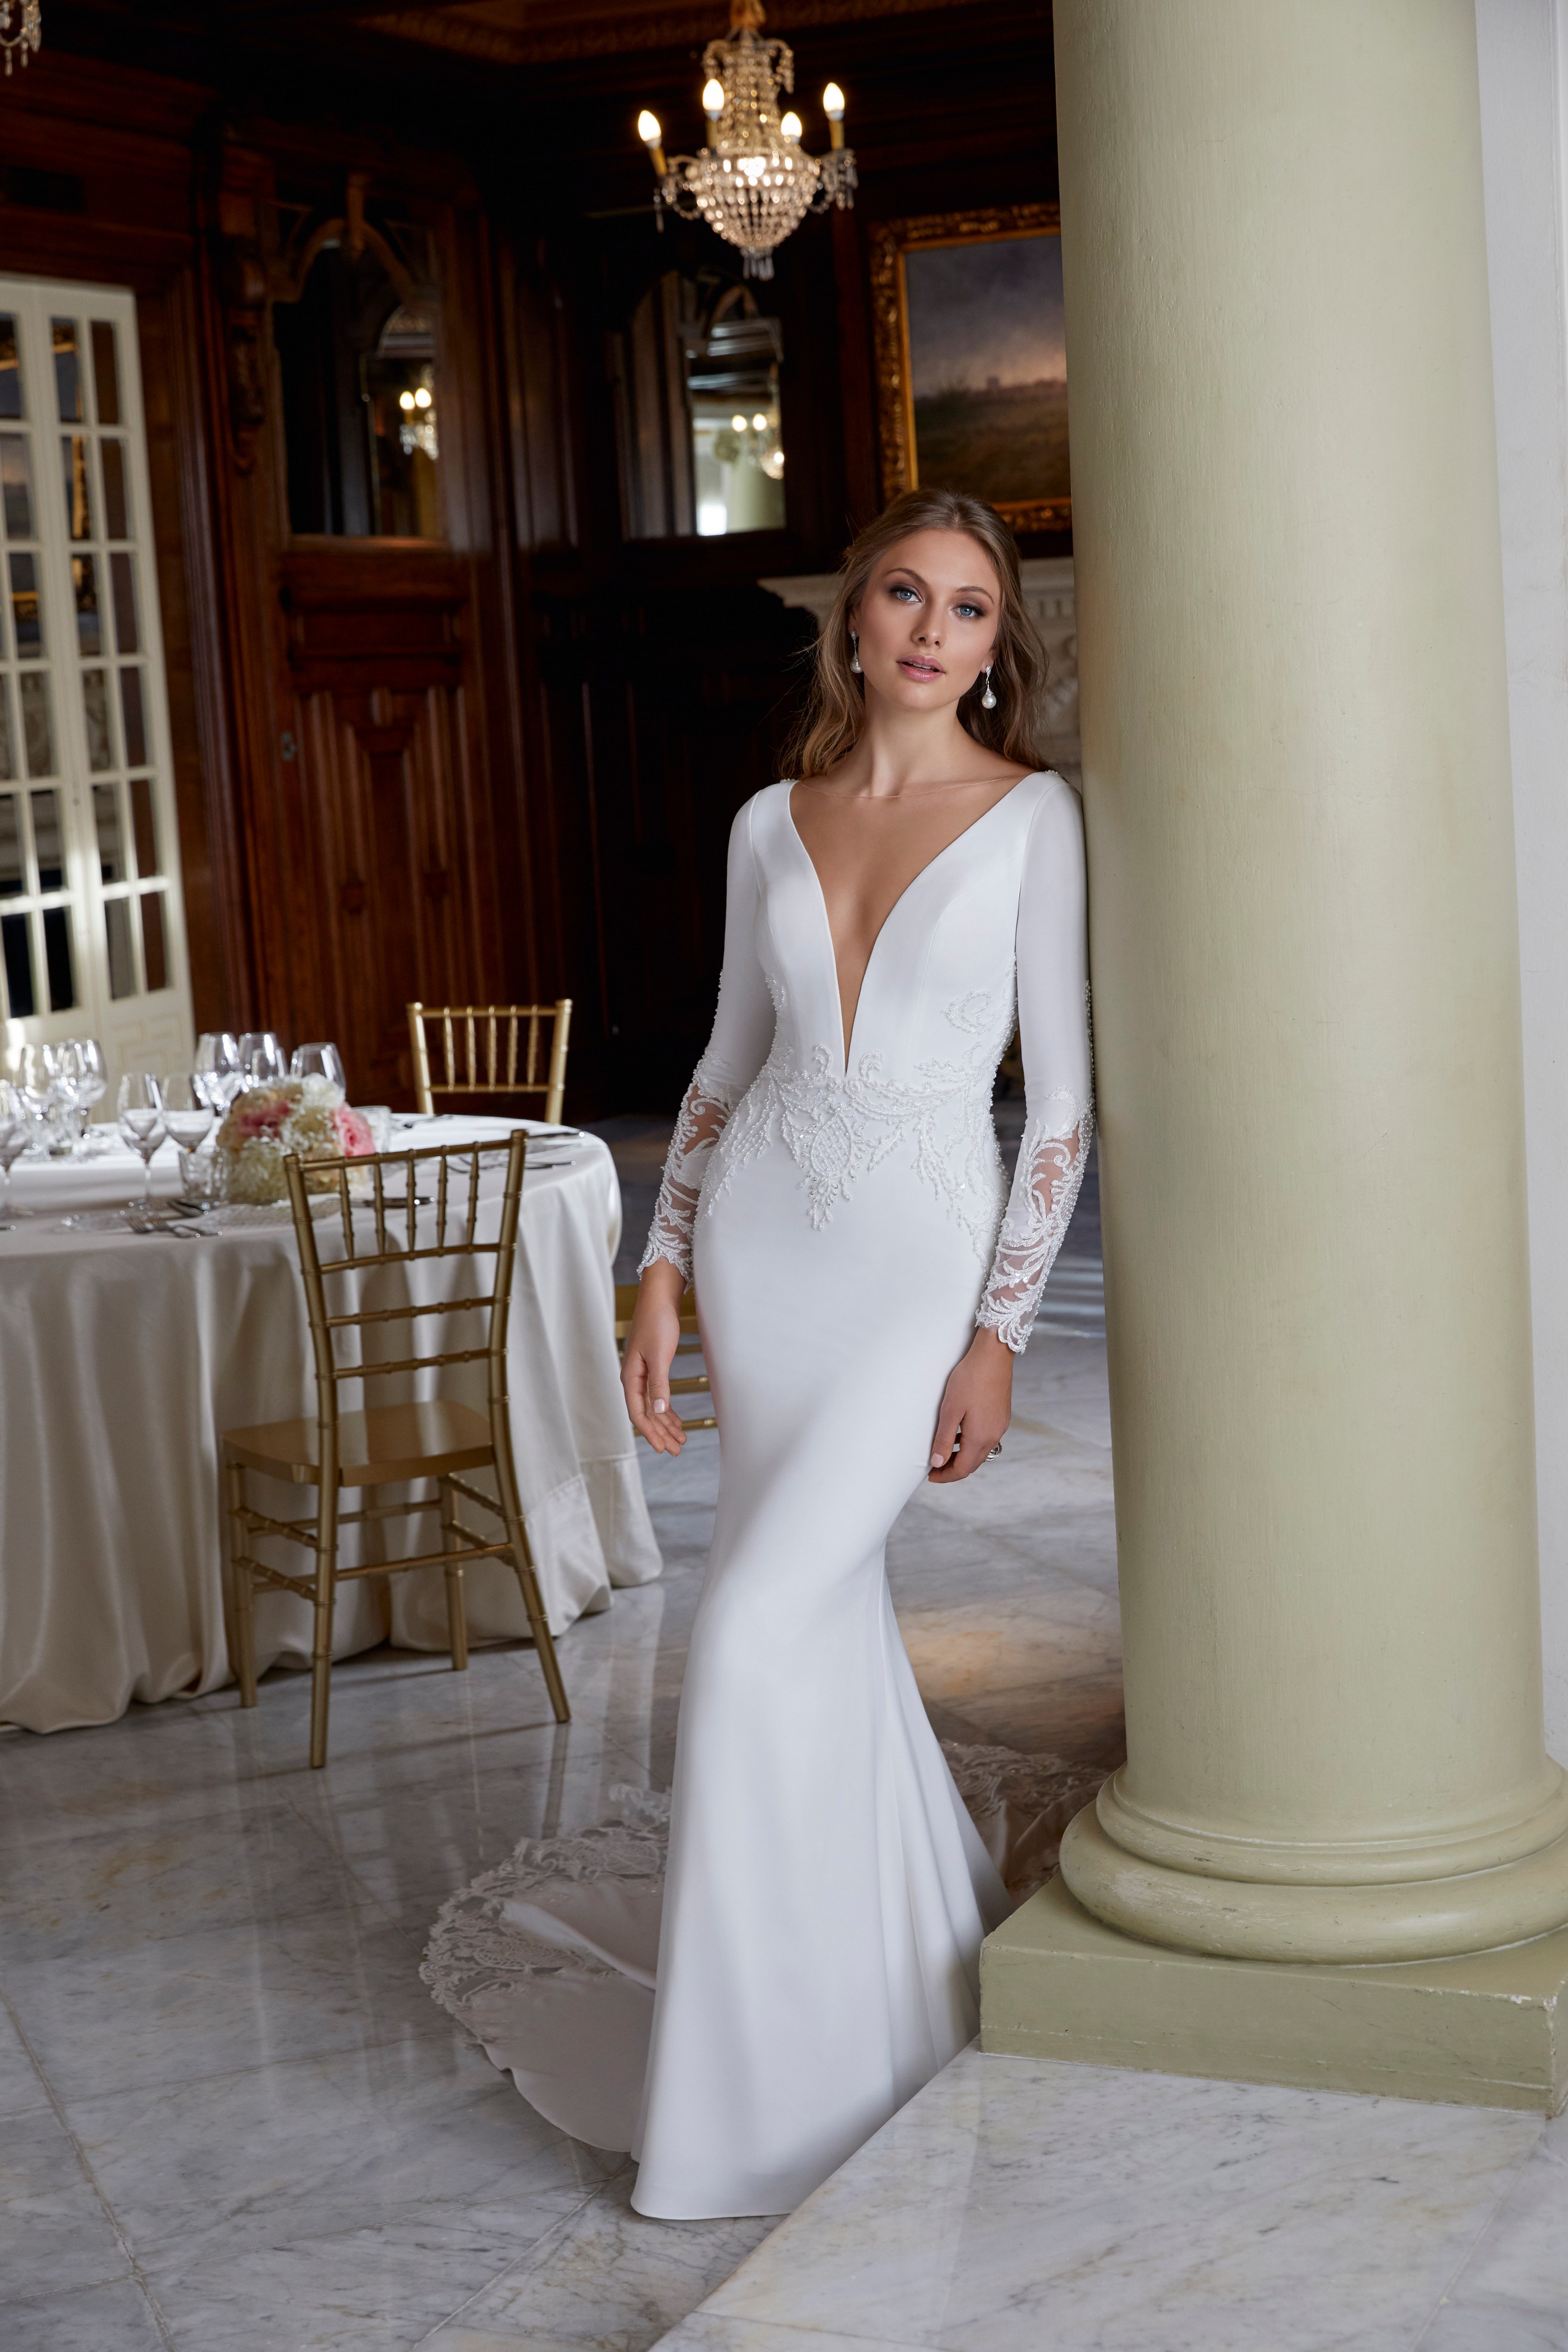 Model in one of our Ronald Joyce wedding dress trends, Doris (style 69573) – an ivory fit and flare dress with a plunging v-neckline, long sleeves and lace embroidery detail